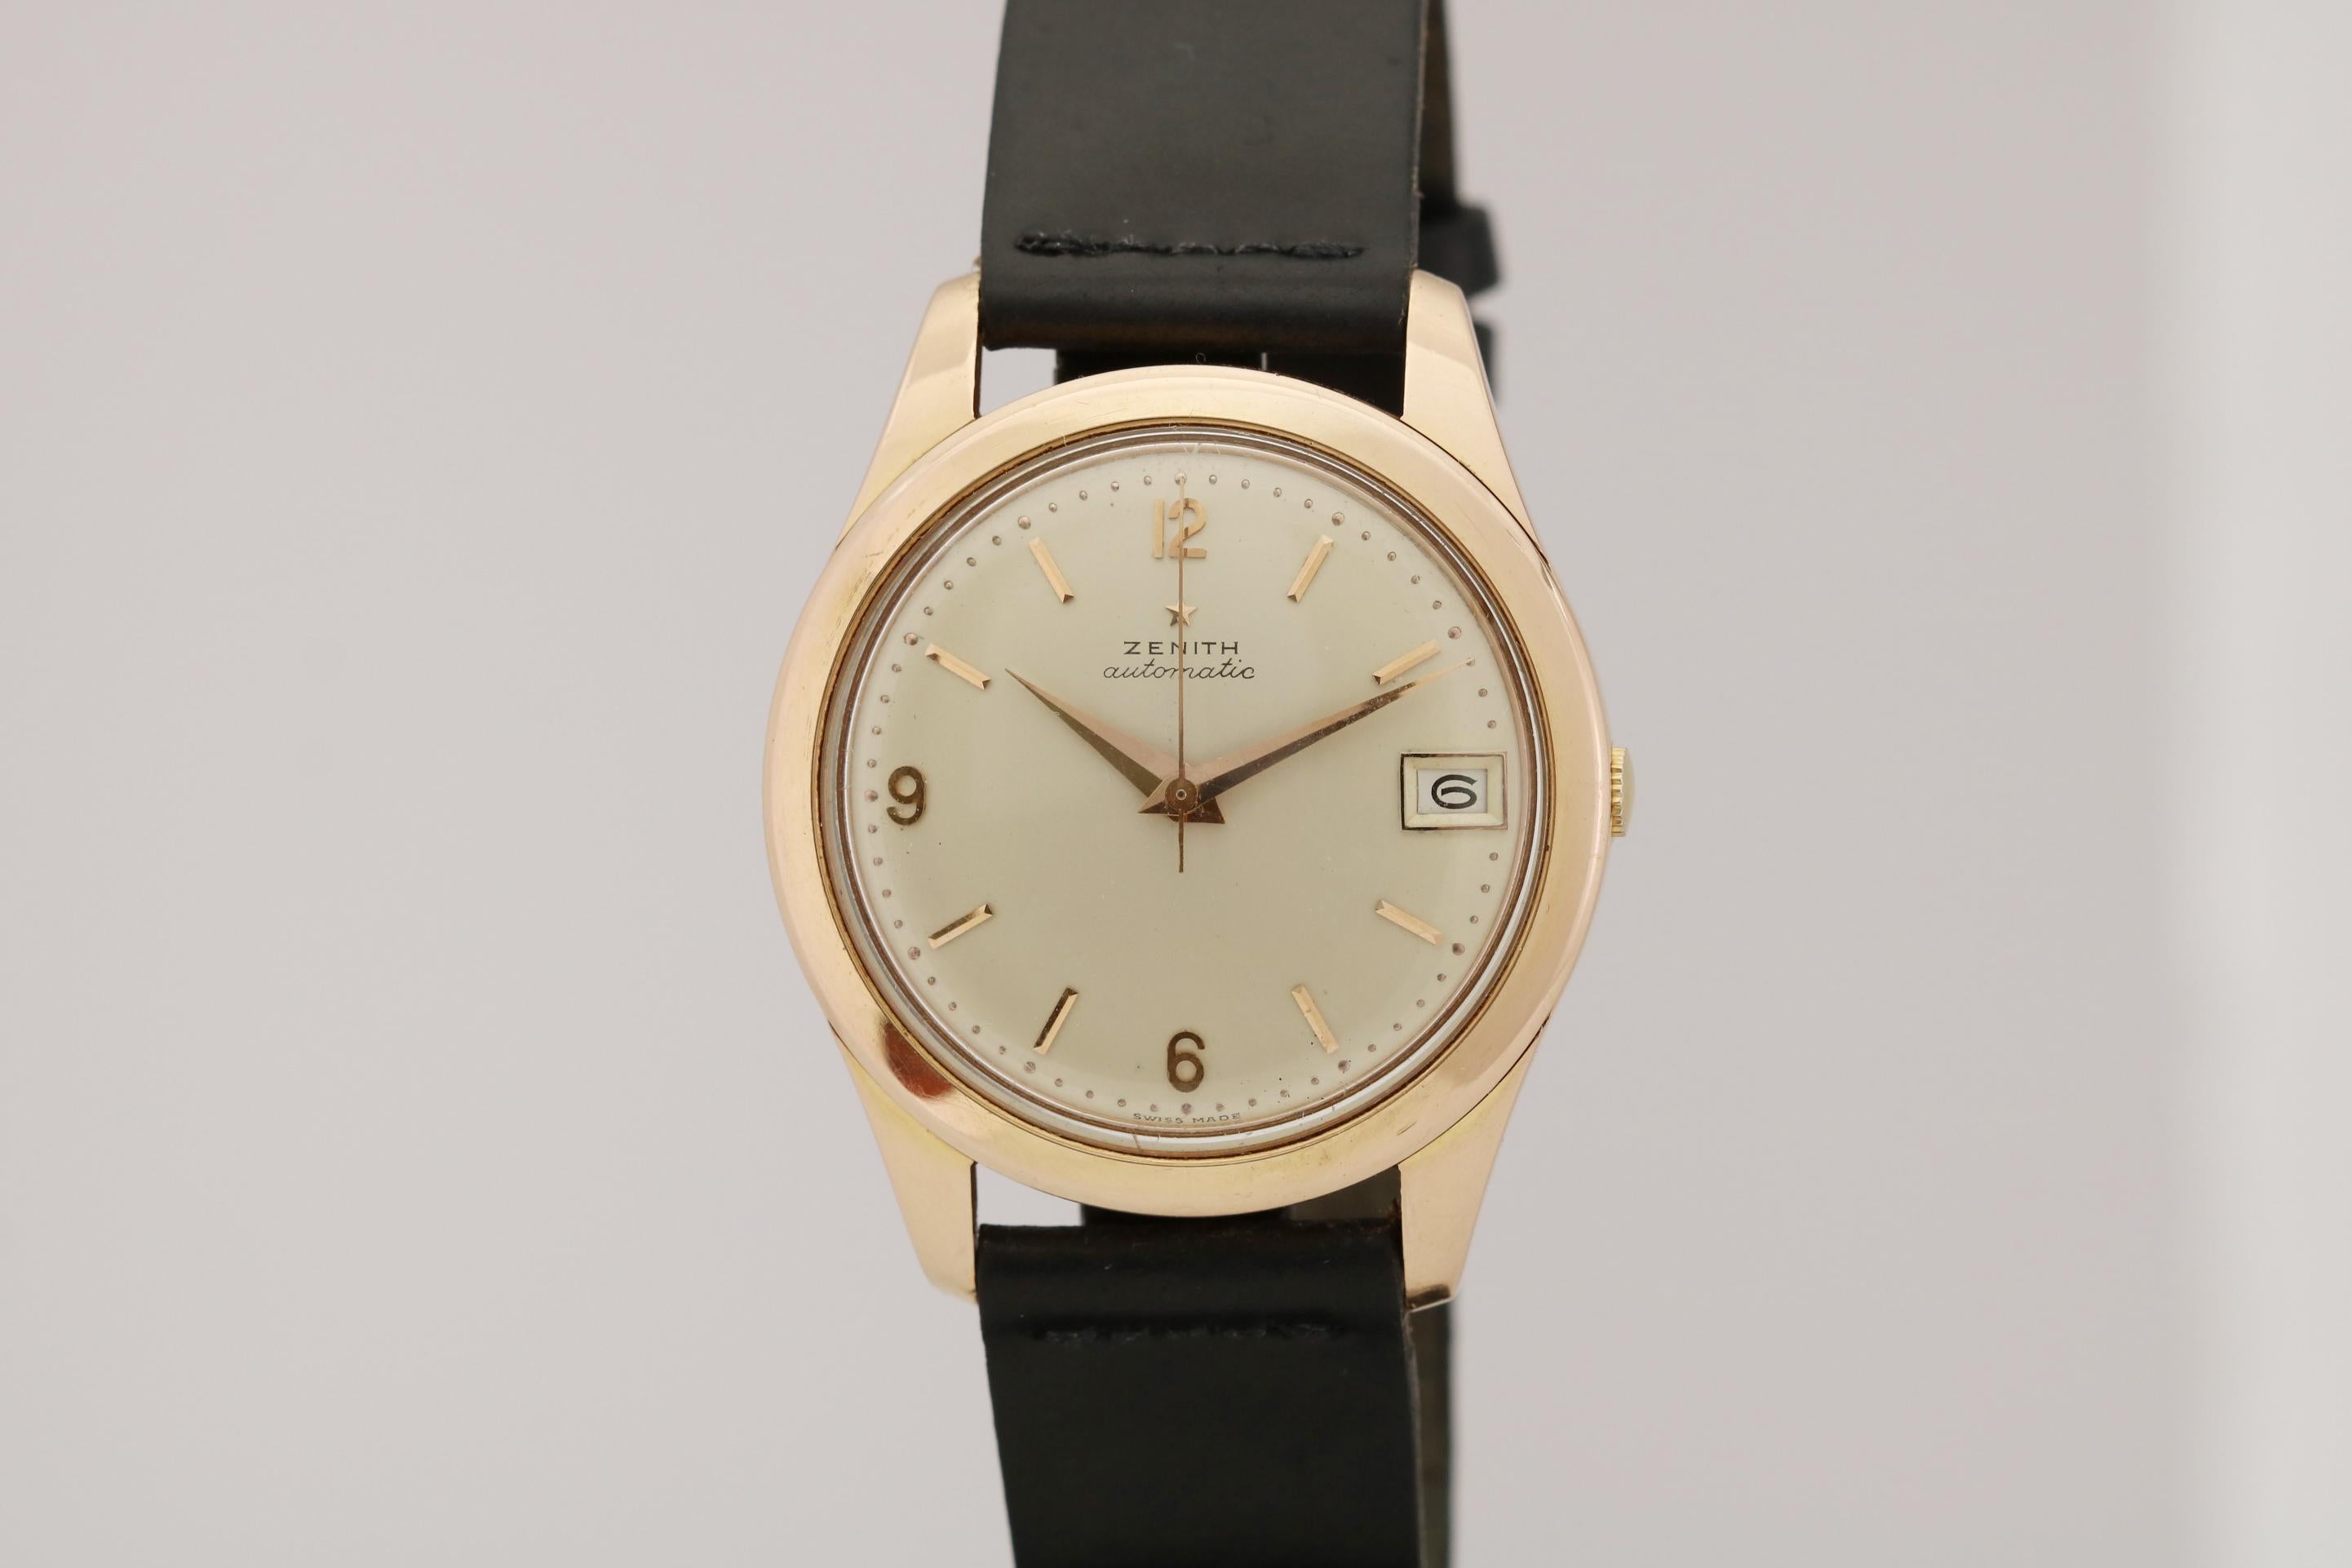 This is a nice and large Zenith Automatic in 18kt Pink Gold from the late 1950's/early 1960's. The watch has a gorgeous matte dial with applied arabic and slash markers with gold daphine hands. There is also a date aperture at 3 oclock. The large